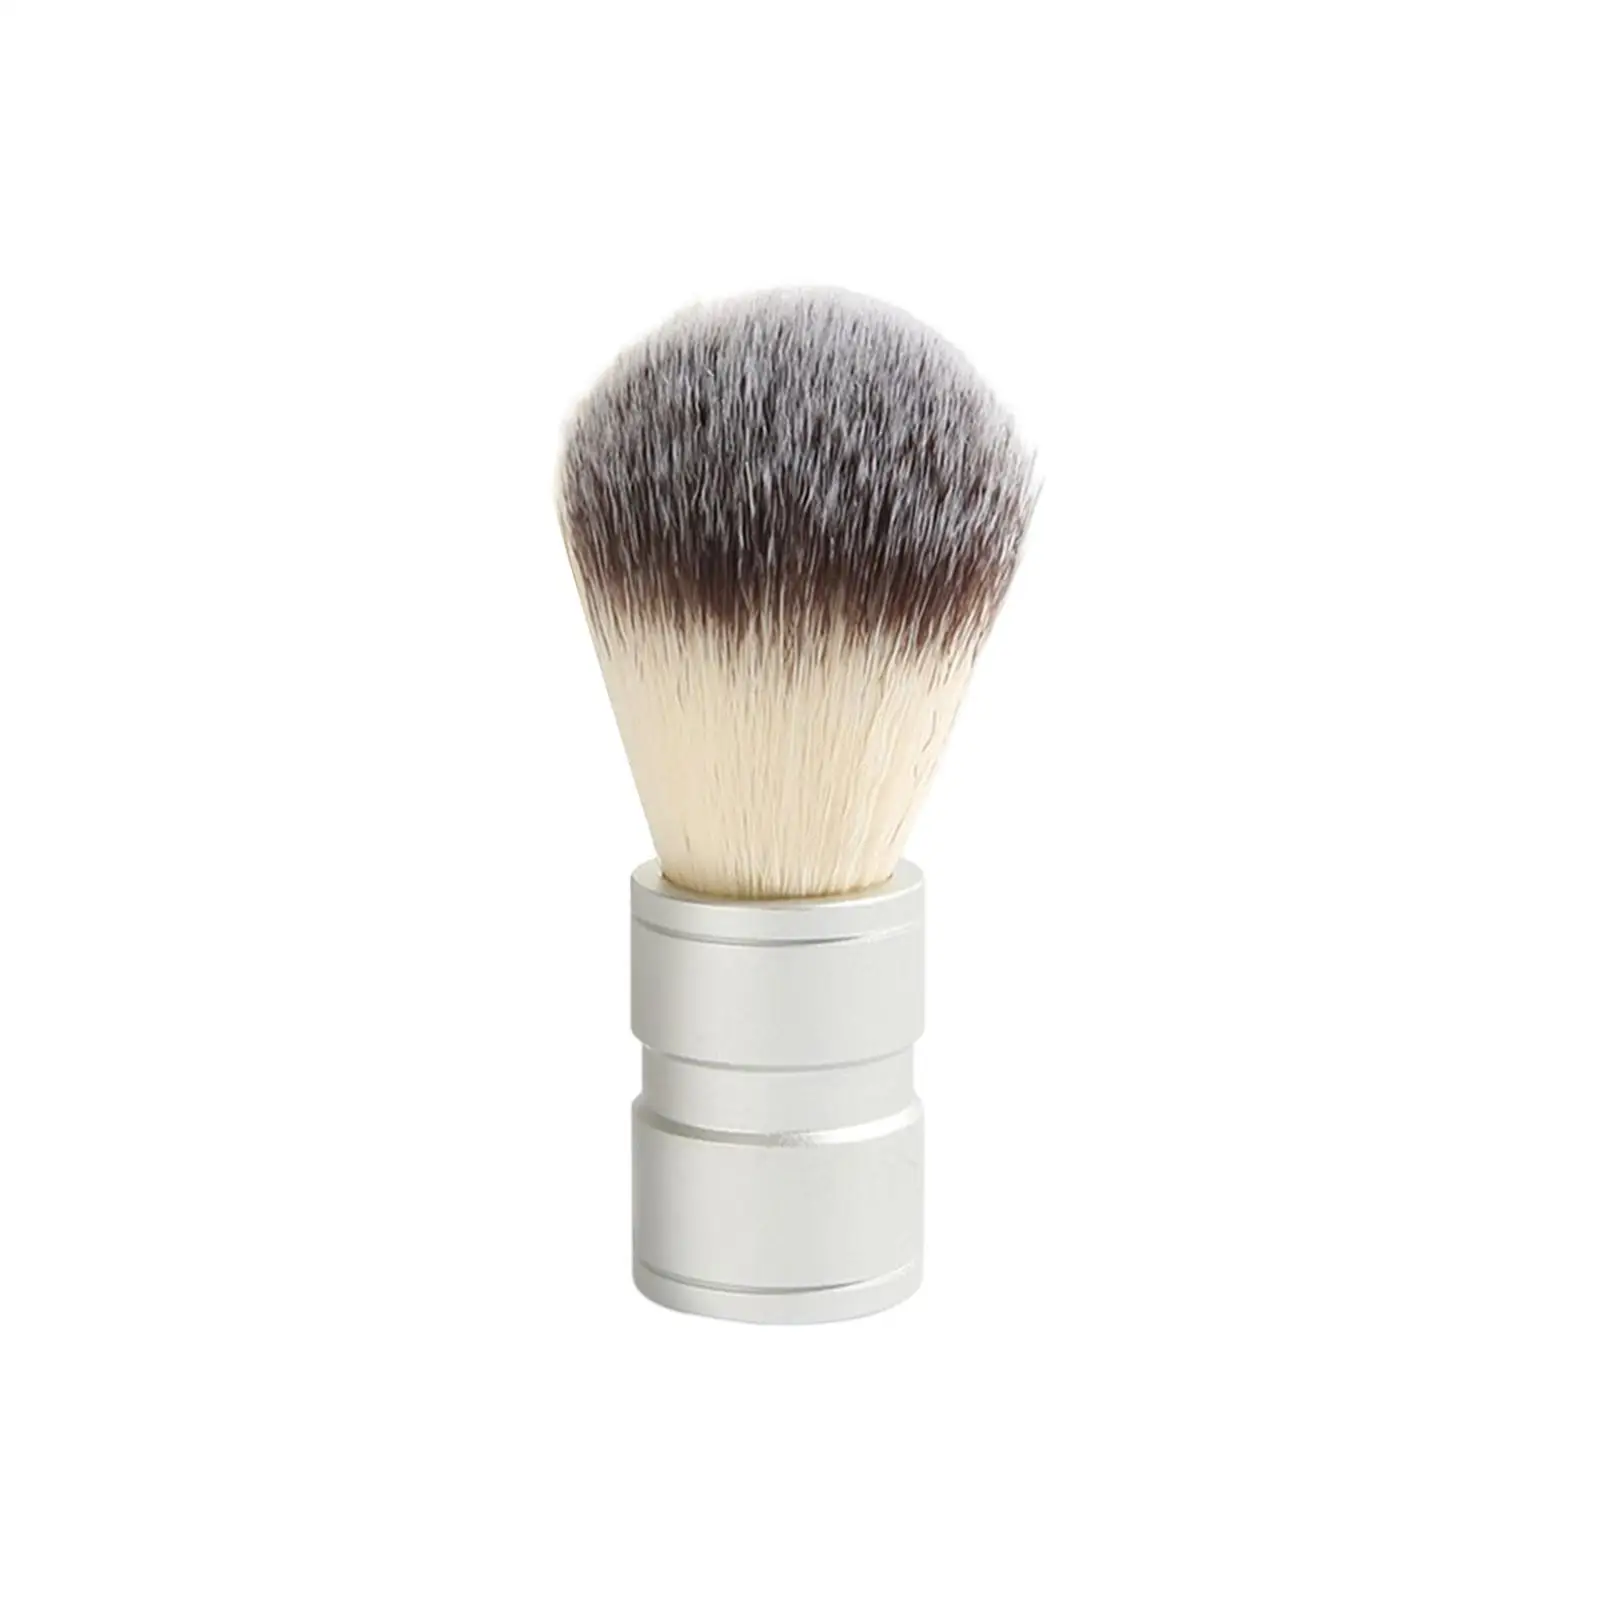 Professional Hair Shaving Brush Makeup Facial Brush Stainless Steel Handle Face Cleaning Hair Salon Brush for Festival Gifts